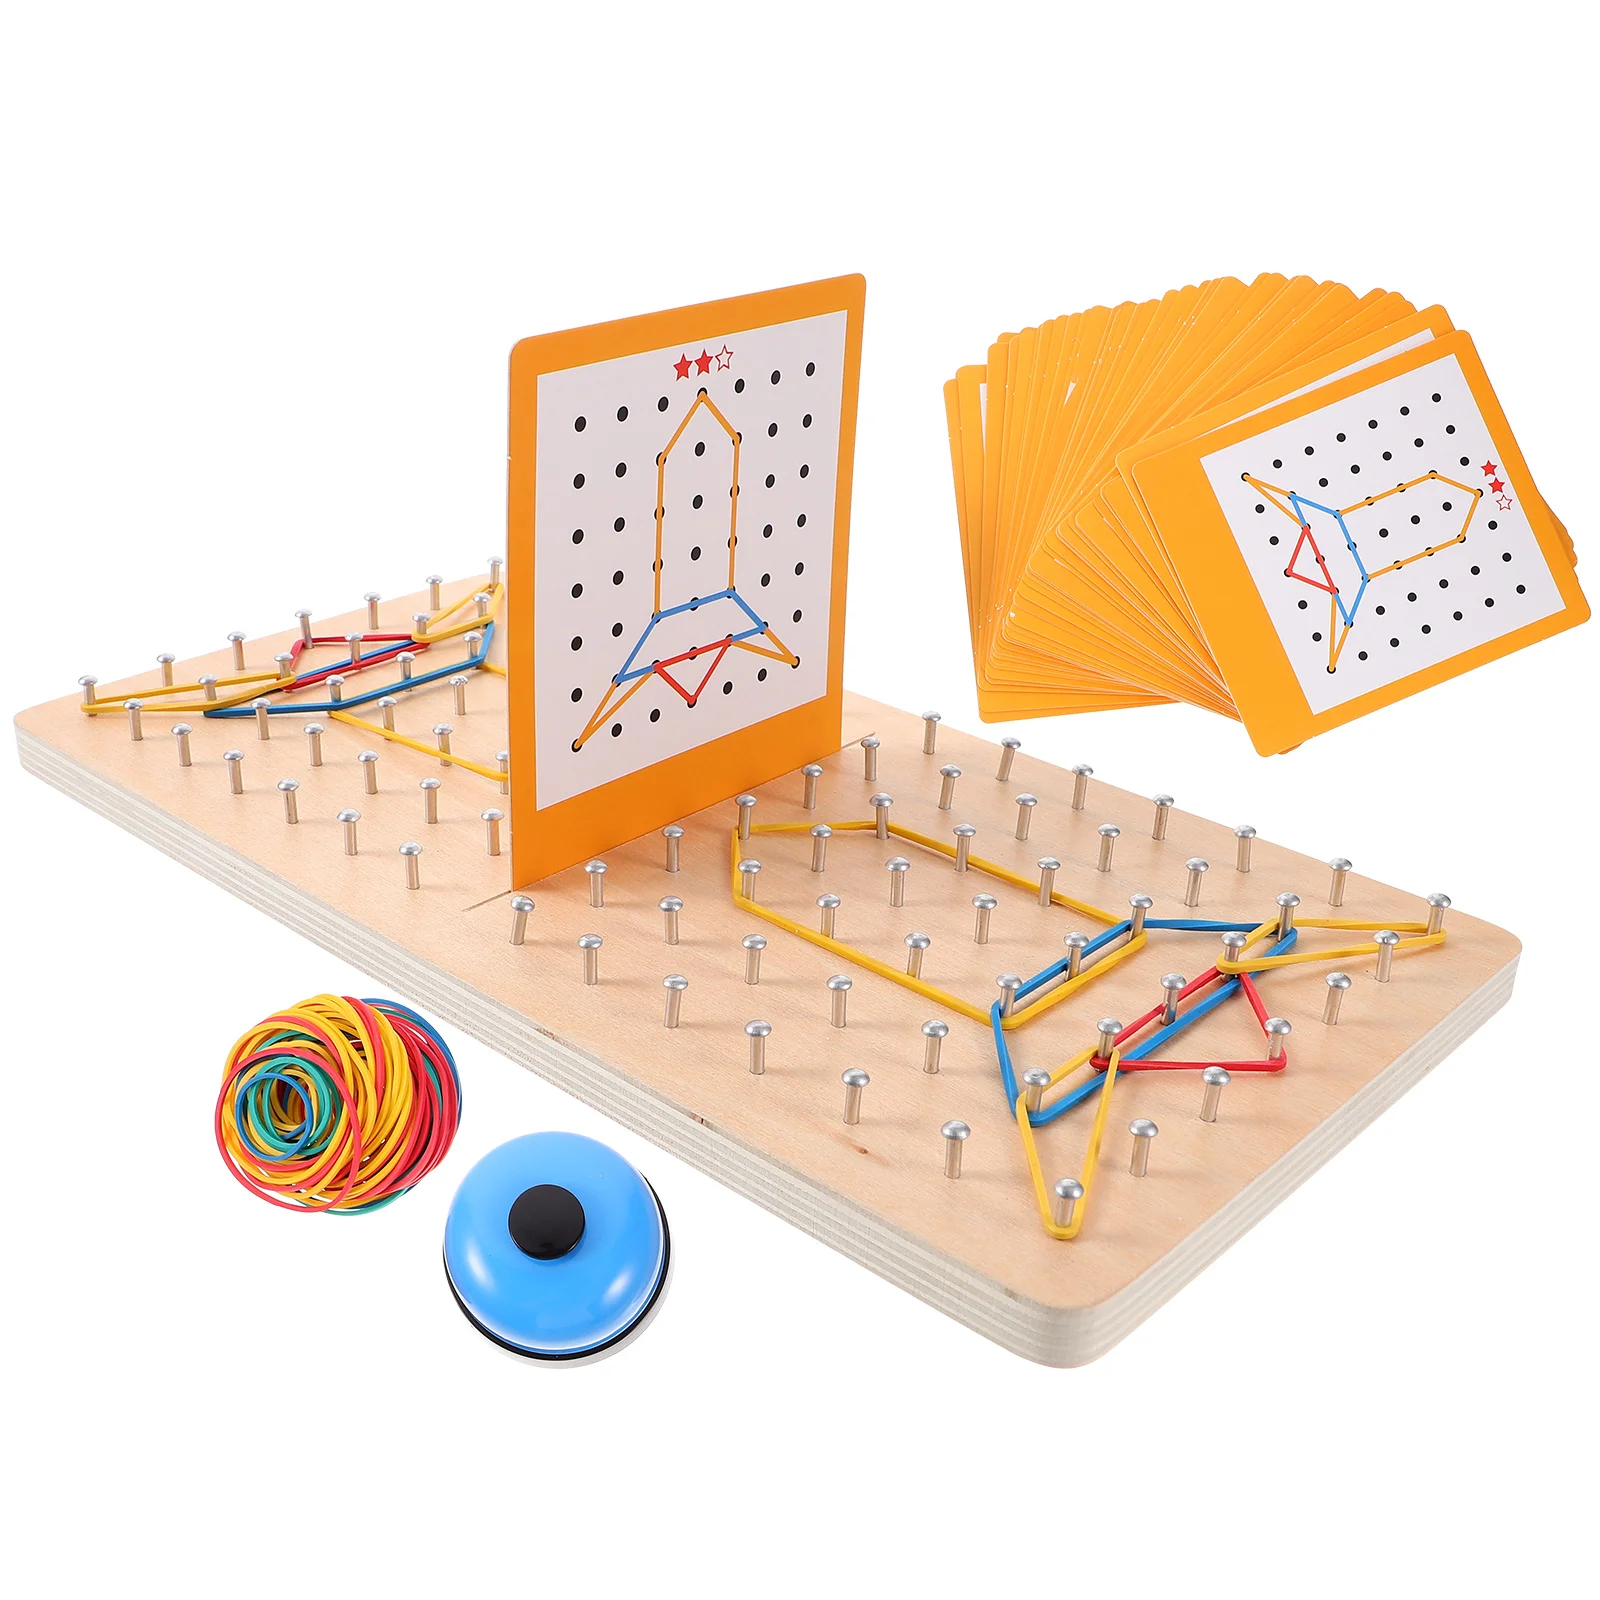 

Toys Geometric Shape Learning Tools Kids Plaything Puzzle Pegboard Educational Geoboard Wooden Nail Plate Primary School